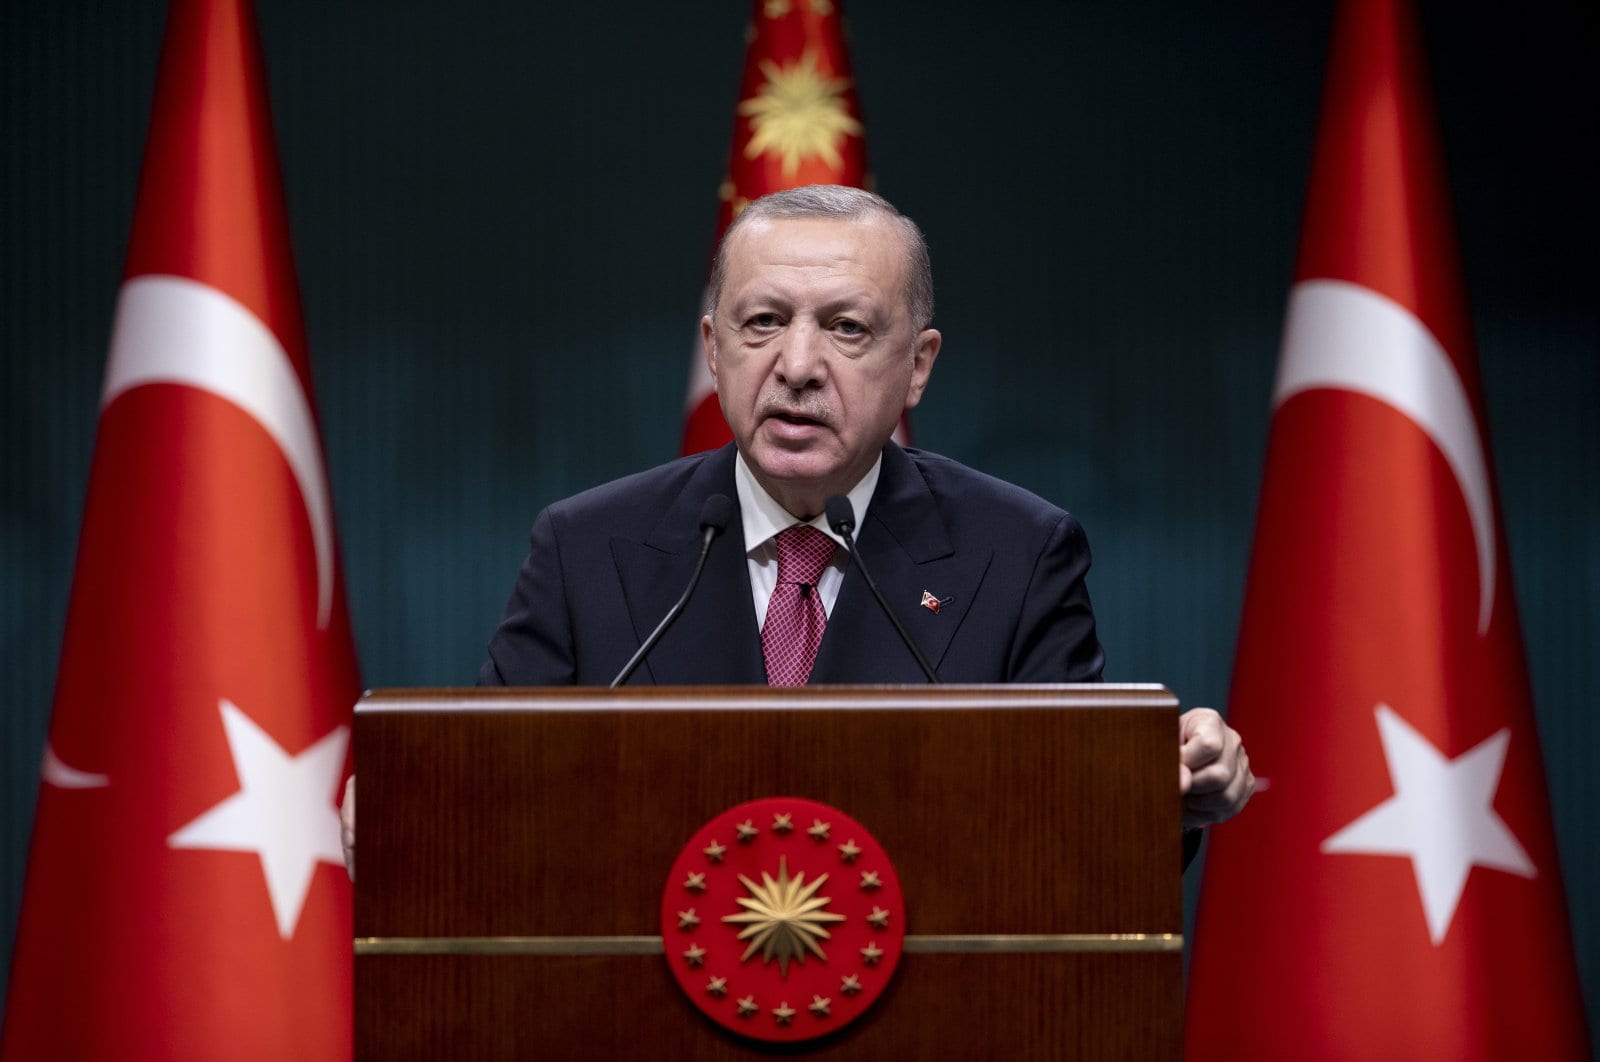 Erdoğan announced that country will begin its new COVID-19 normalization period